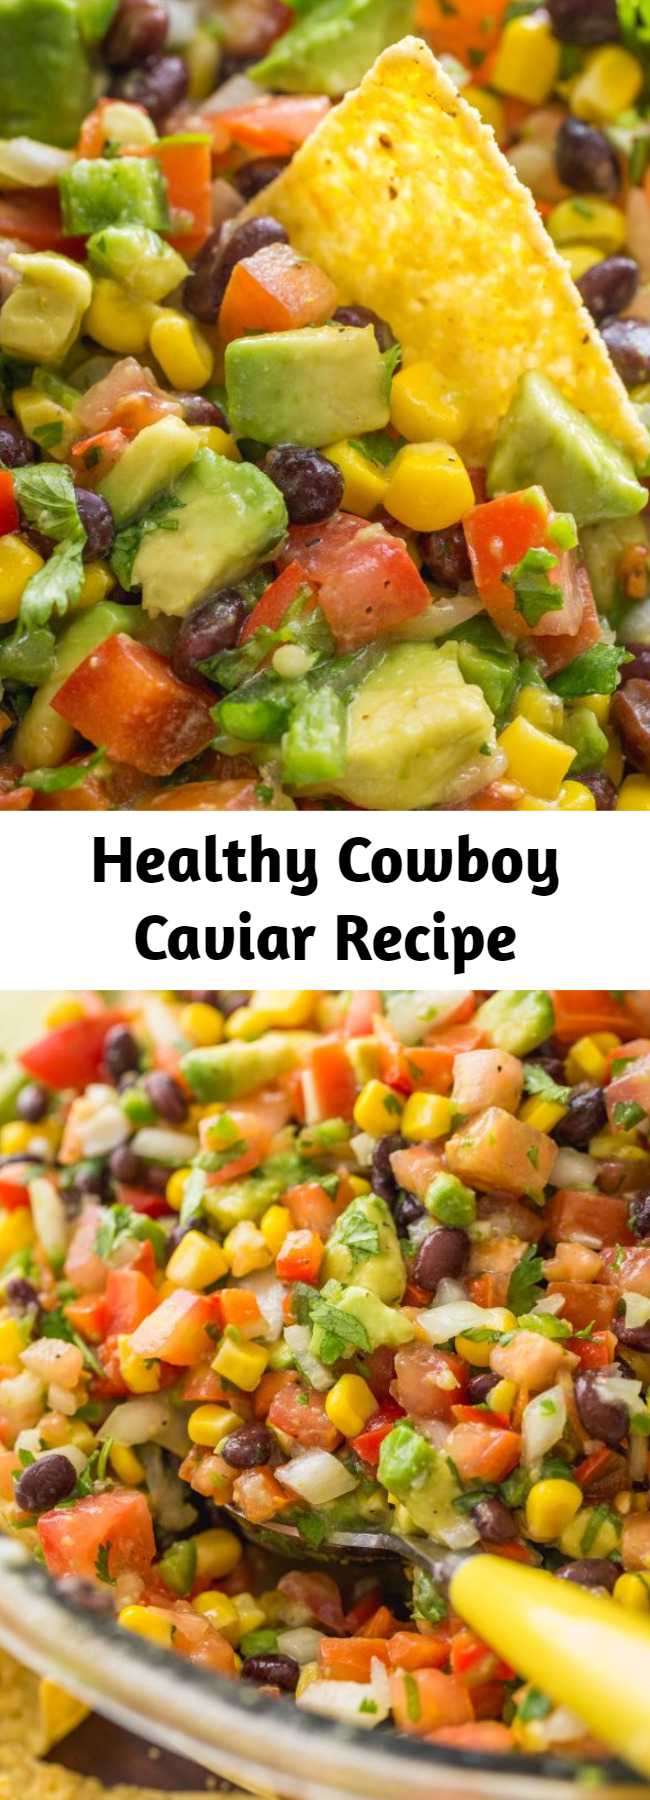 Healthy Cowboy Caviar Recipe - This Cowboy Caviar salsa is wonderfully fresh, healthy, simple and loaded! We make this salsa all summer long. It makes a big batch so it is an ideal summer party dip. A surprising ingredient infuses every bite with incredible flavor. This cowboy caviar (a.k.a. Texas Caviar) always disappears fast! #cowboycaviar #salsa #dip #appetizer #texascaviar #salsarecipe #diprecipe #beandip #avocadodip #avocadosalsa #beansalsa #avocados